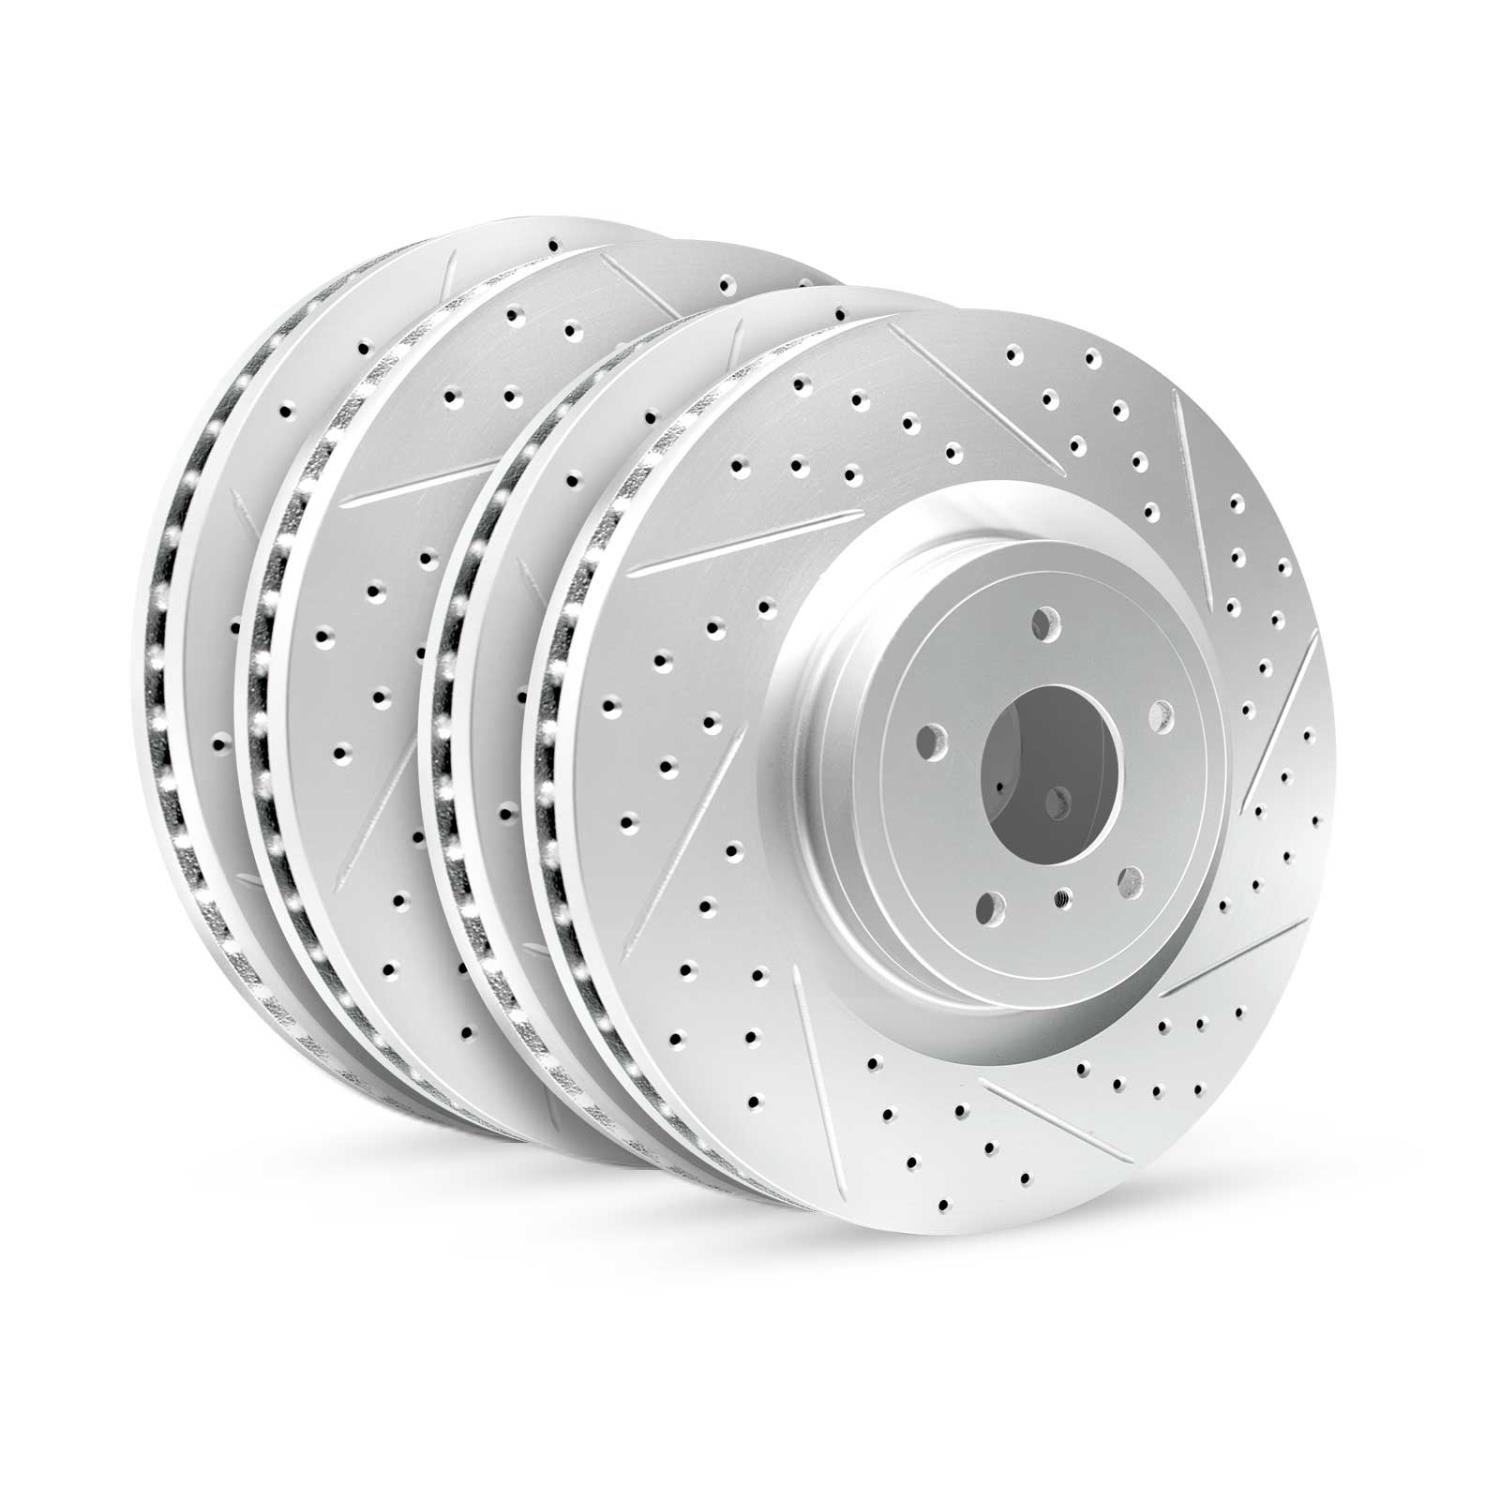 GEO-Carbon Drilled/Slotted Rotors, 2002-2006 Ford/Mazda,